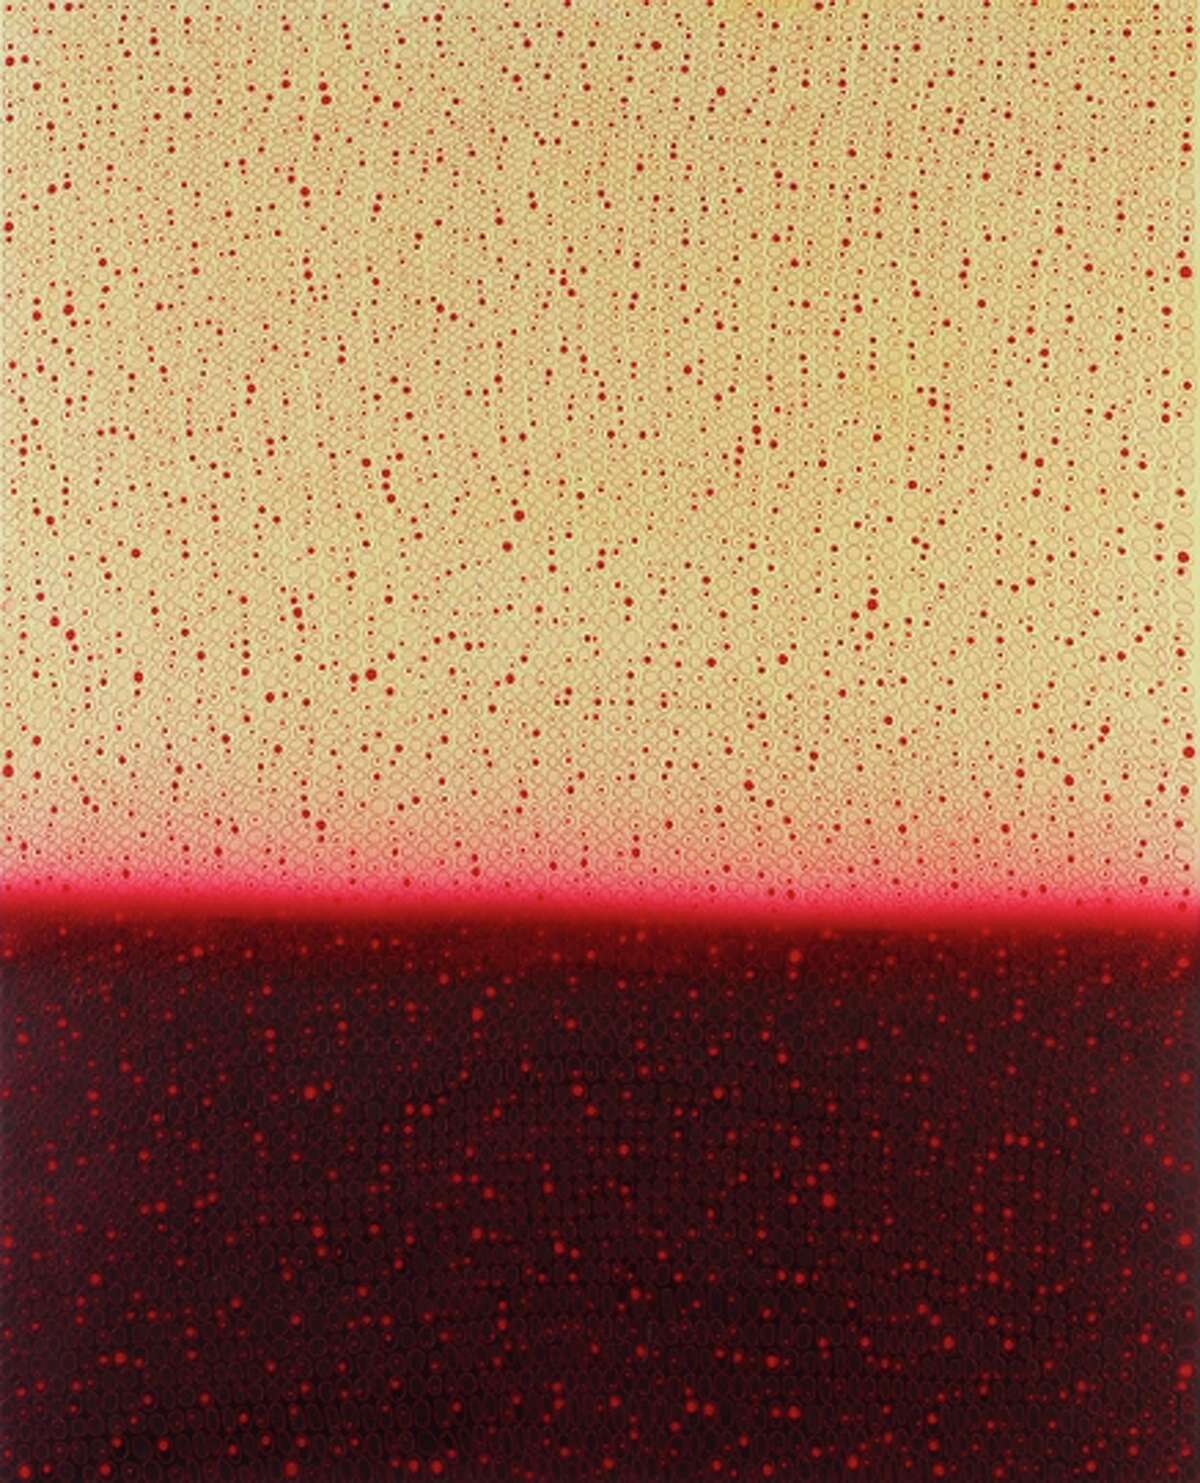 “Untitled #687,” 2015 acrylic on canvas over board by Teo González.